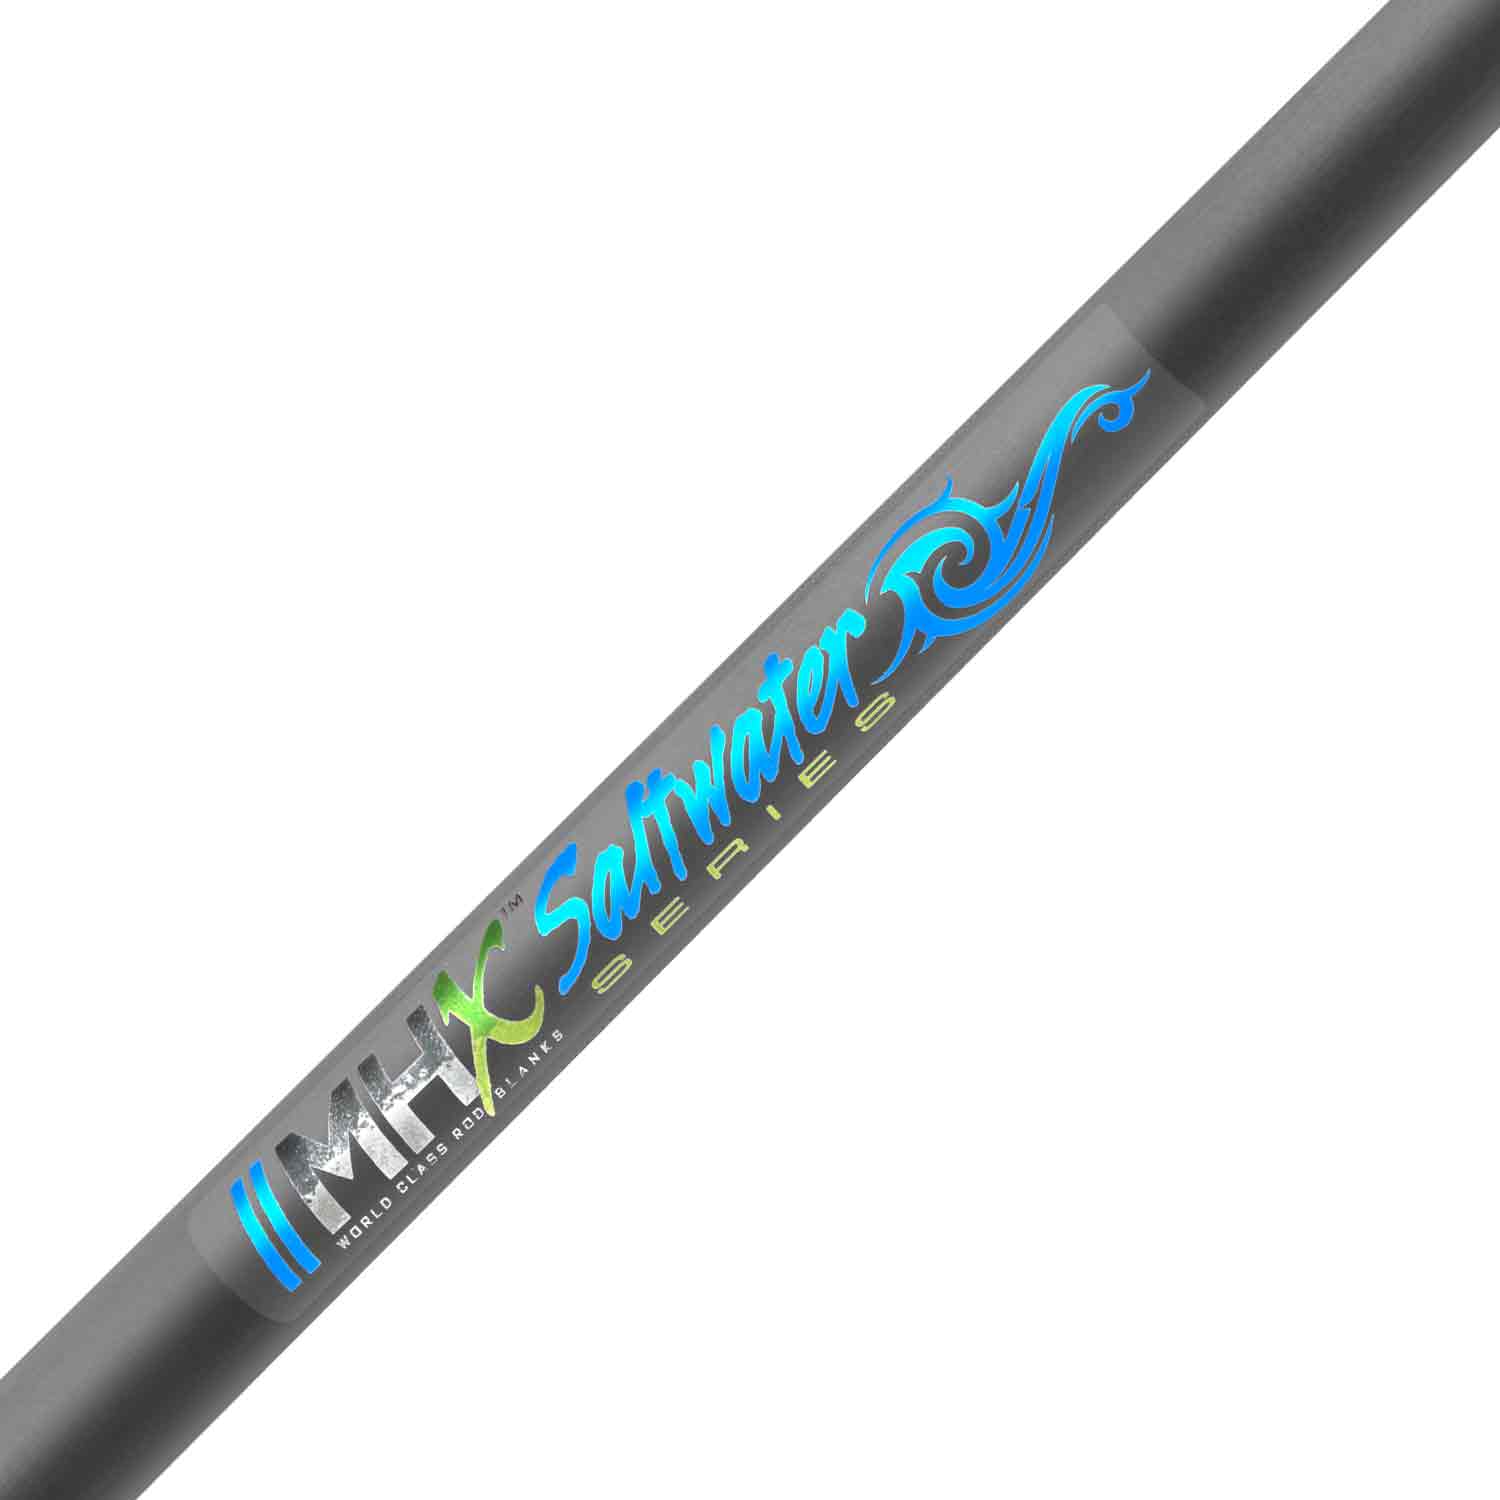 MHX 7'6" Med-Heavy Composite Saltwater Rod Blank - GFC90MH